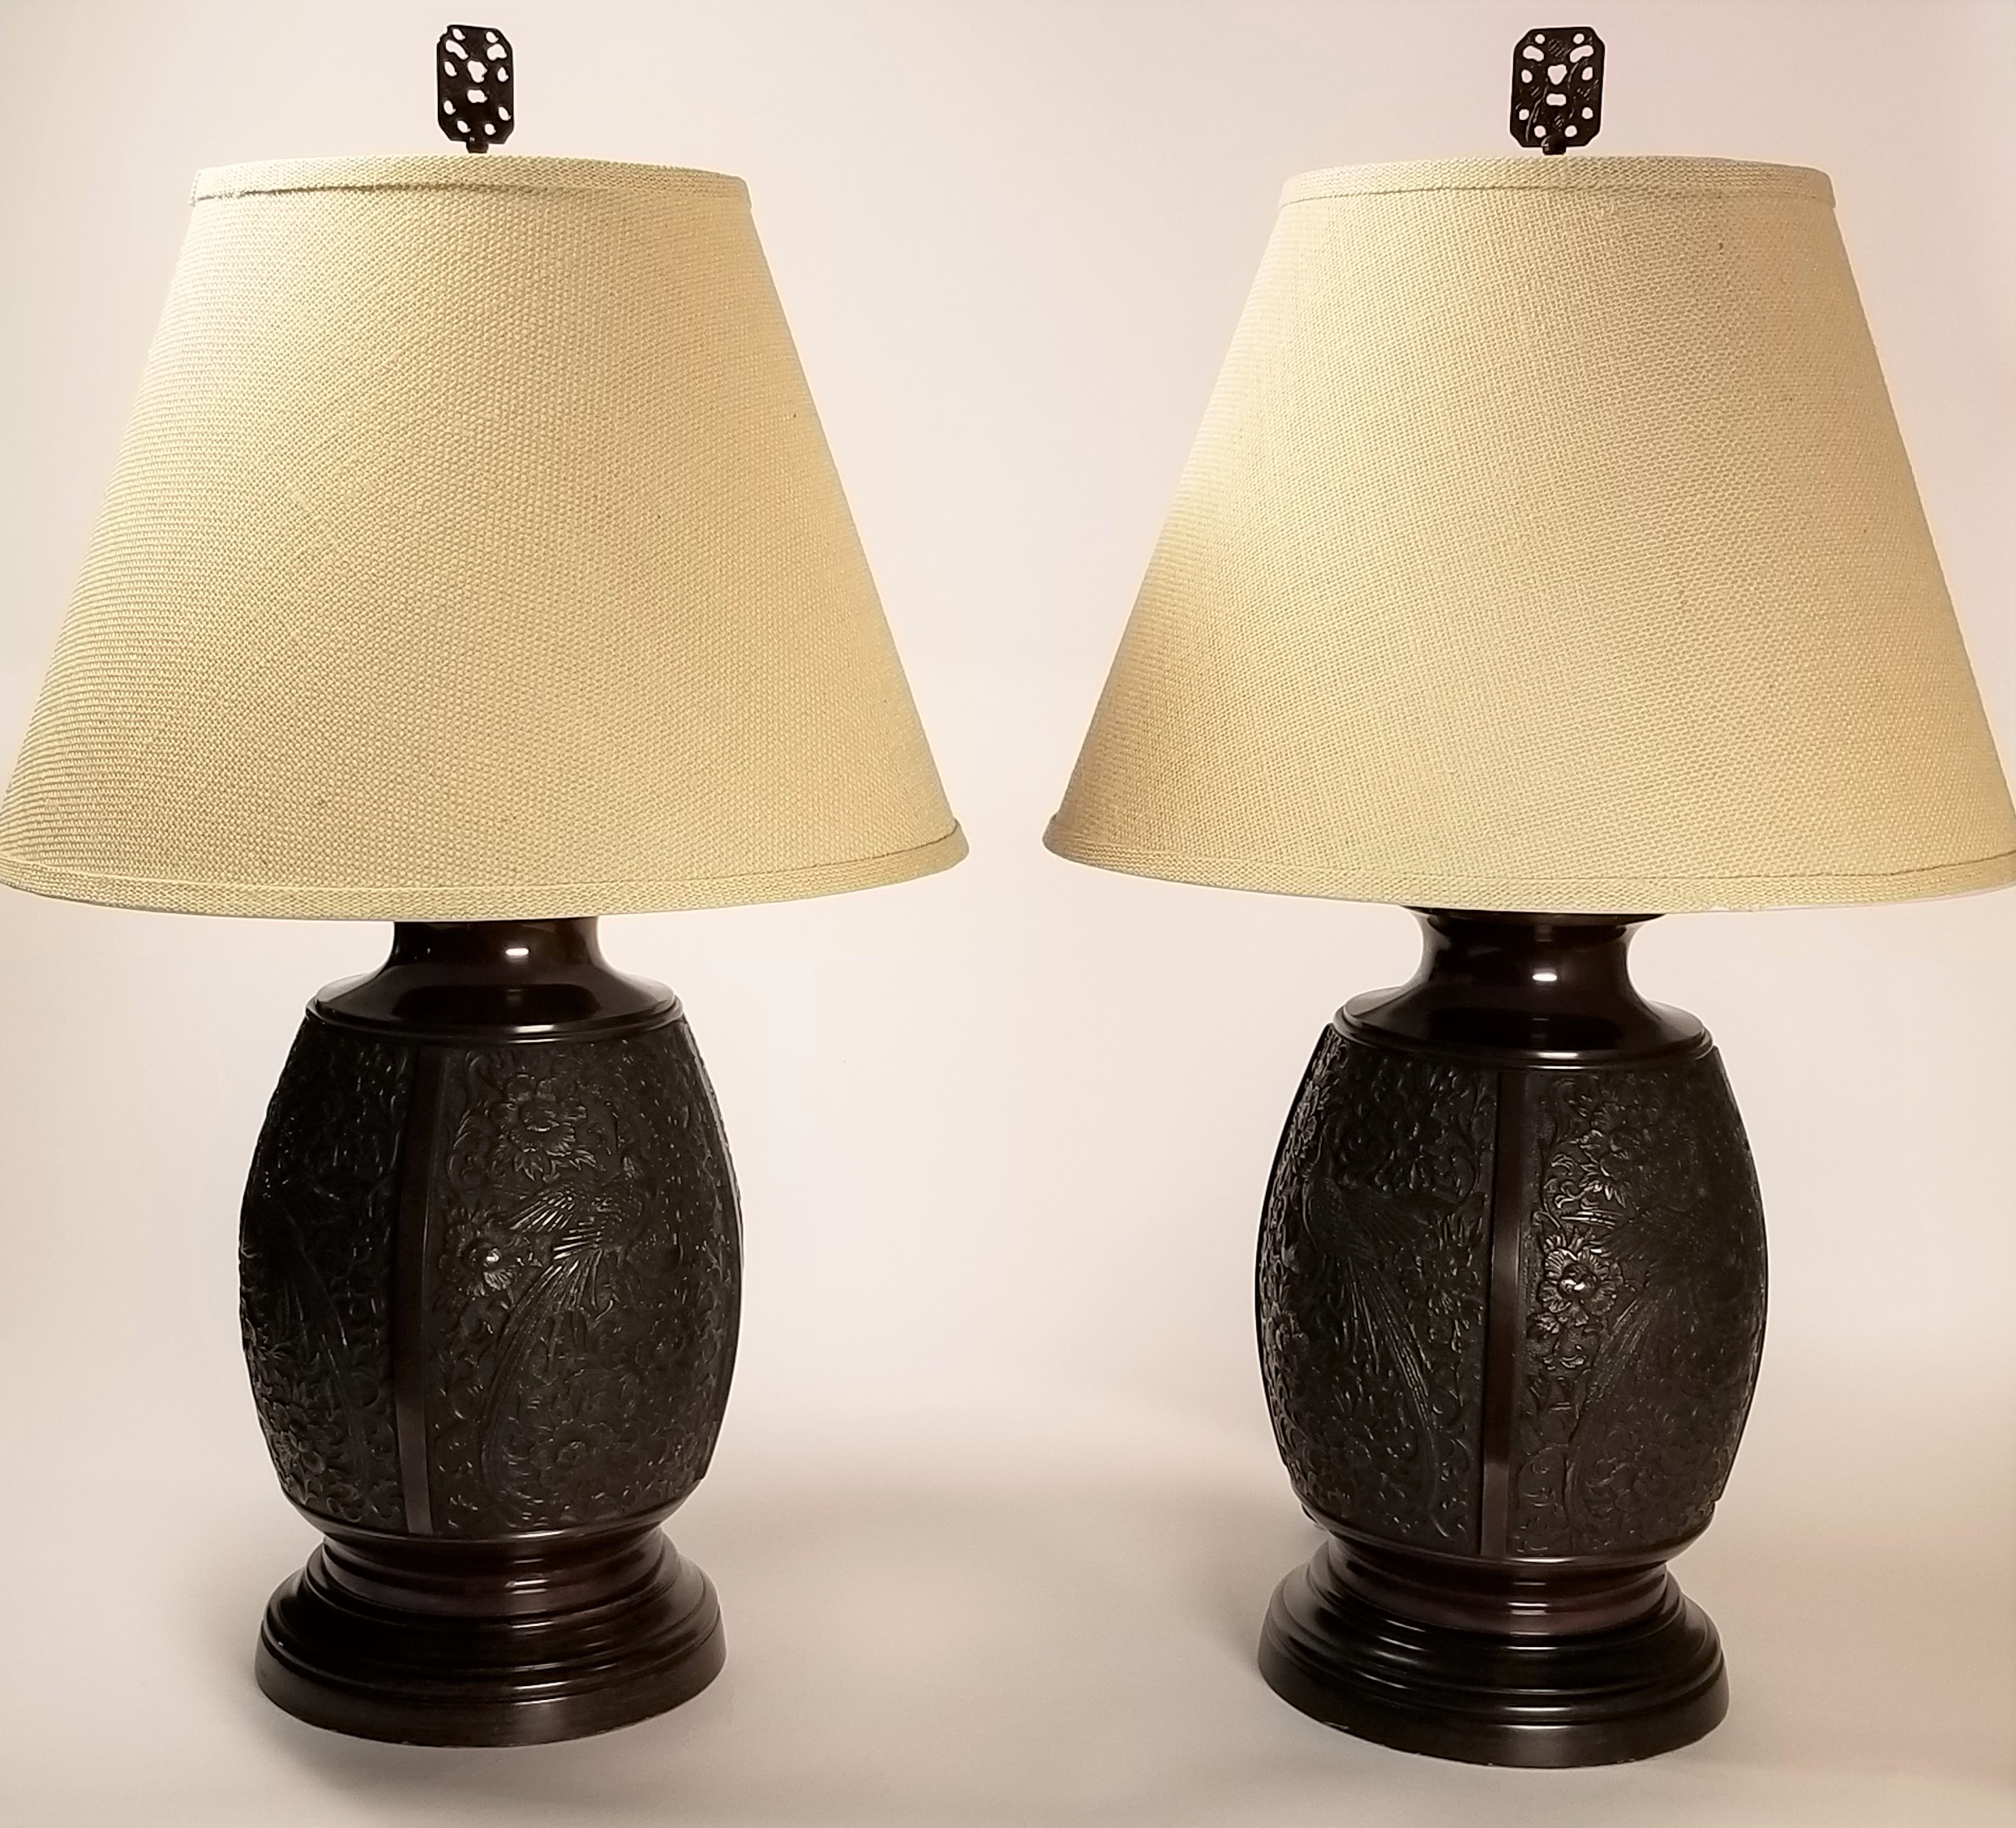 Lighting, Sold - Vintage Bronze Table Lamps, a Pair - 10343 - Rubbish